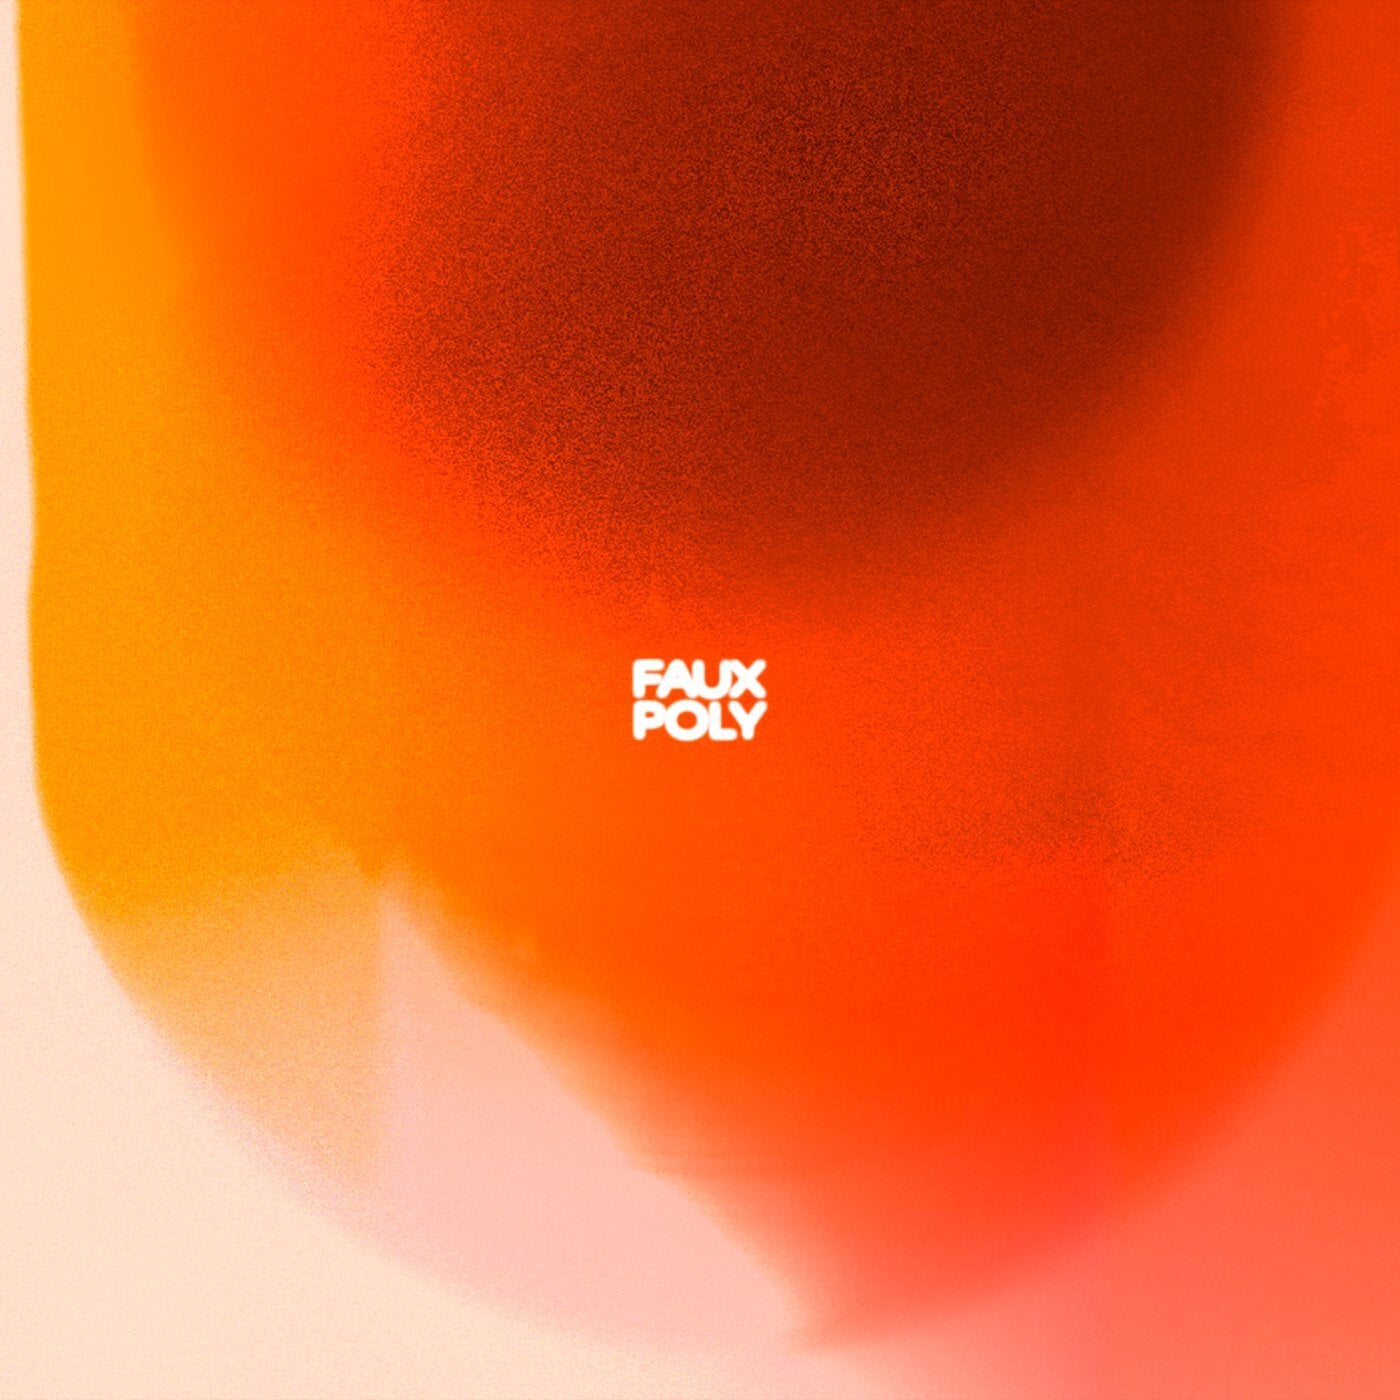 Faux Poly: Remixed 001